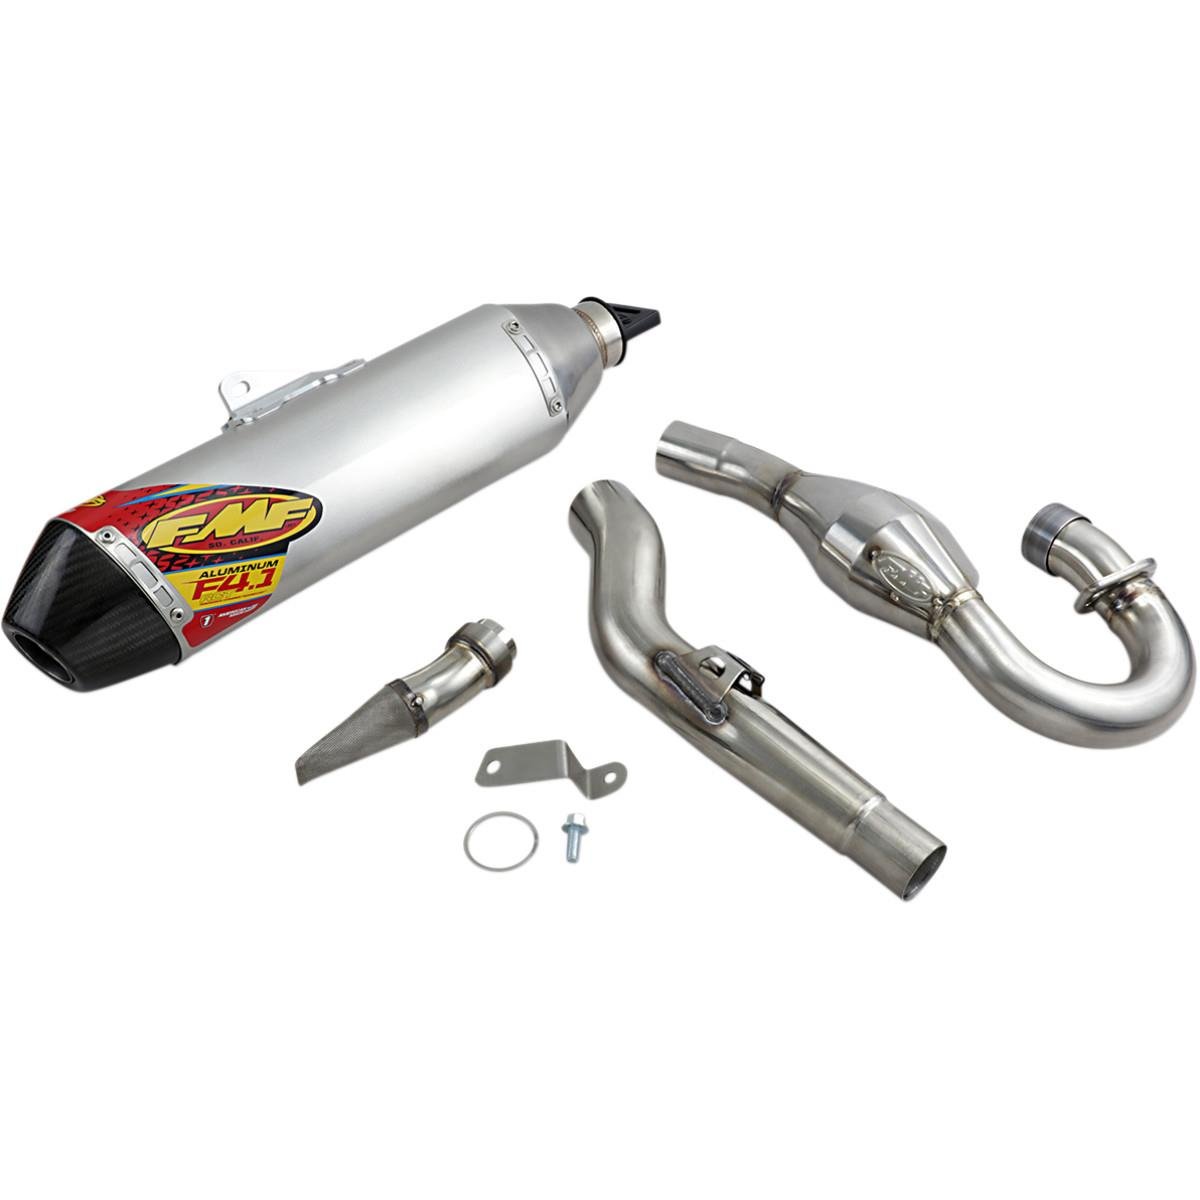 FMF Scarico completo Factory 4.1 RCT Stainless Kawasaki KX 450F 19-